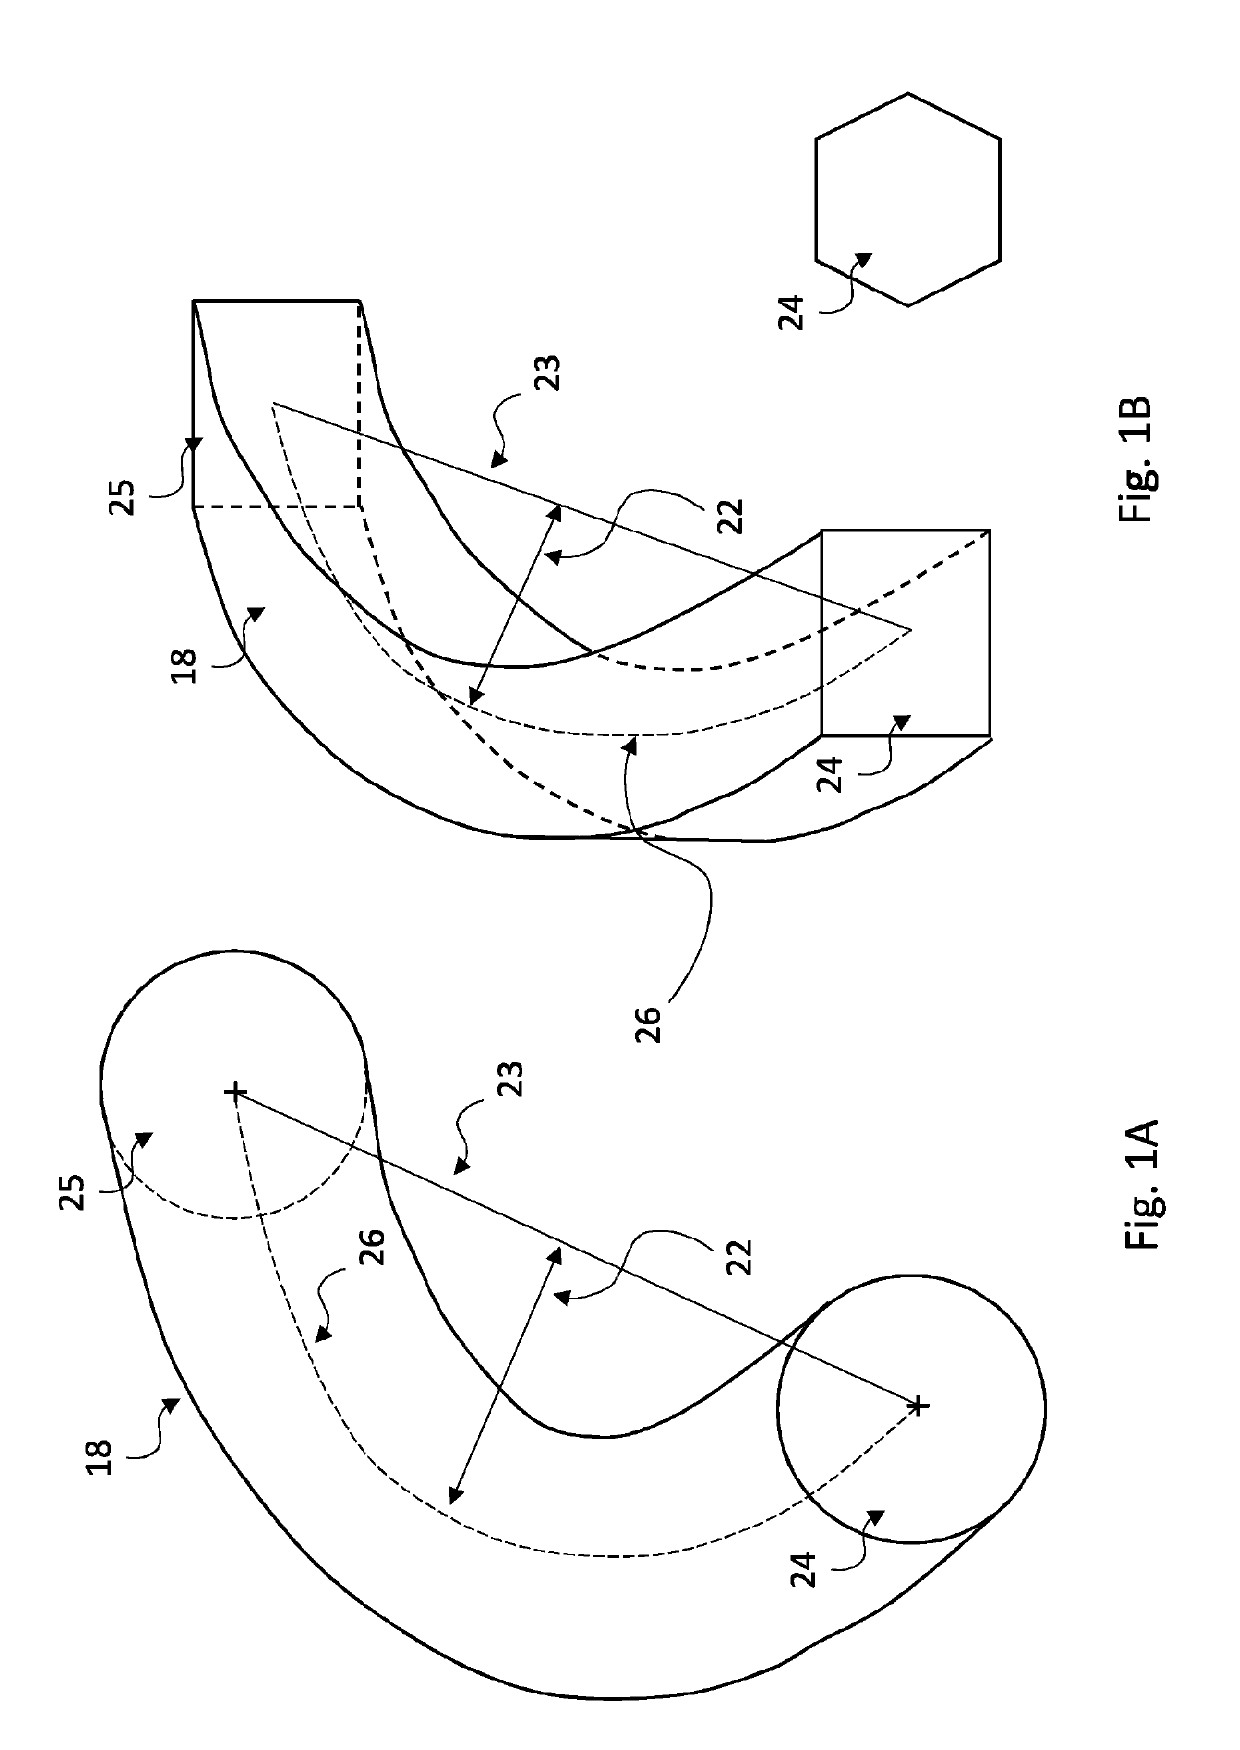 3D floating support system and related geometry-detecting machine of slender articles